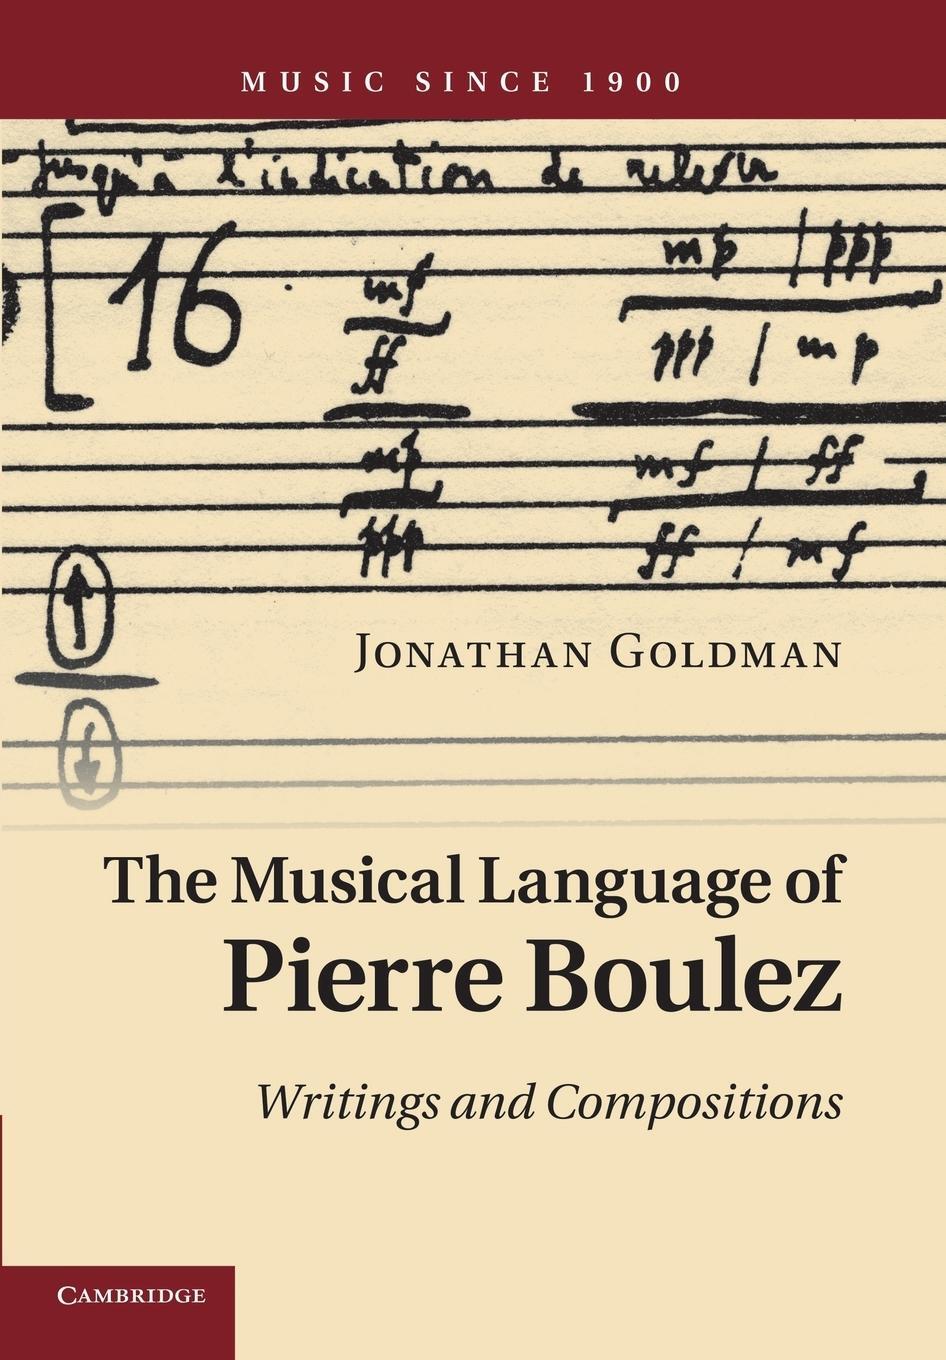 Cover: 9781107673205 | The Musical Language of Pierre Boulez | Writings and Compositions